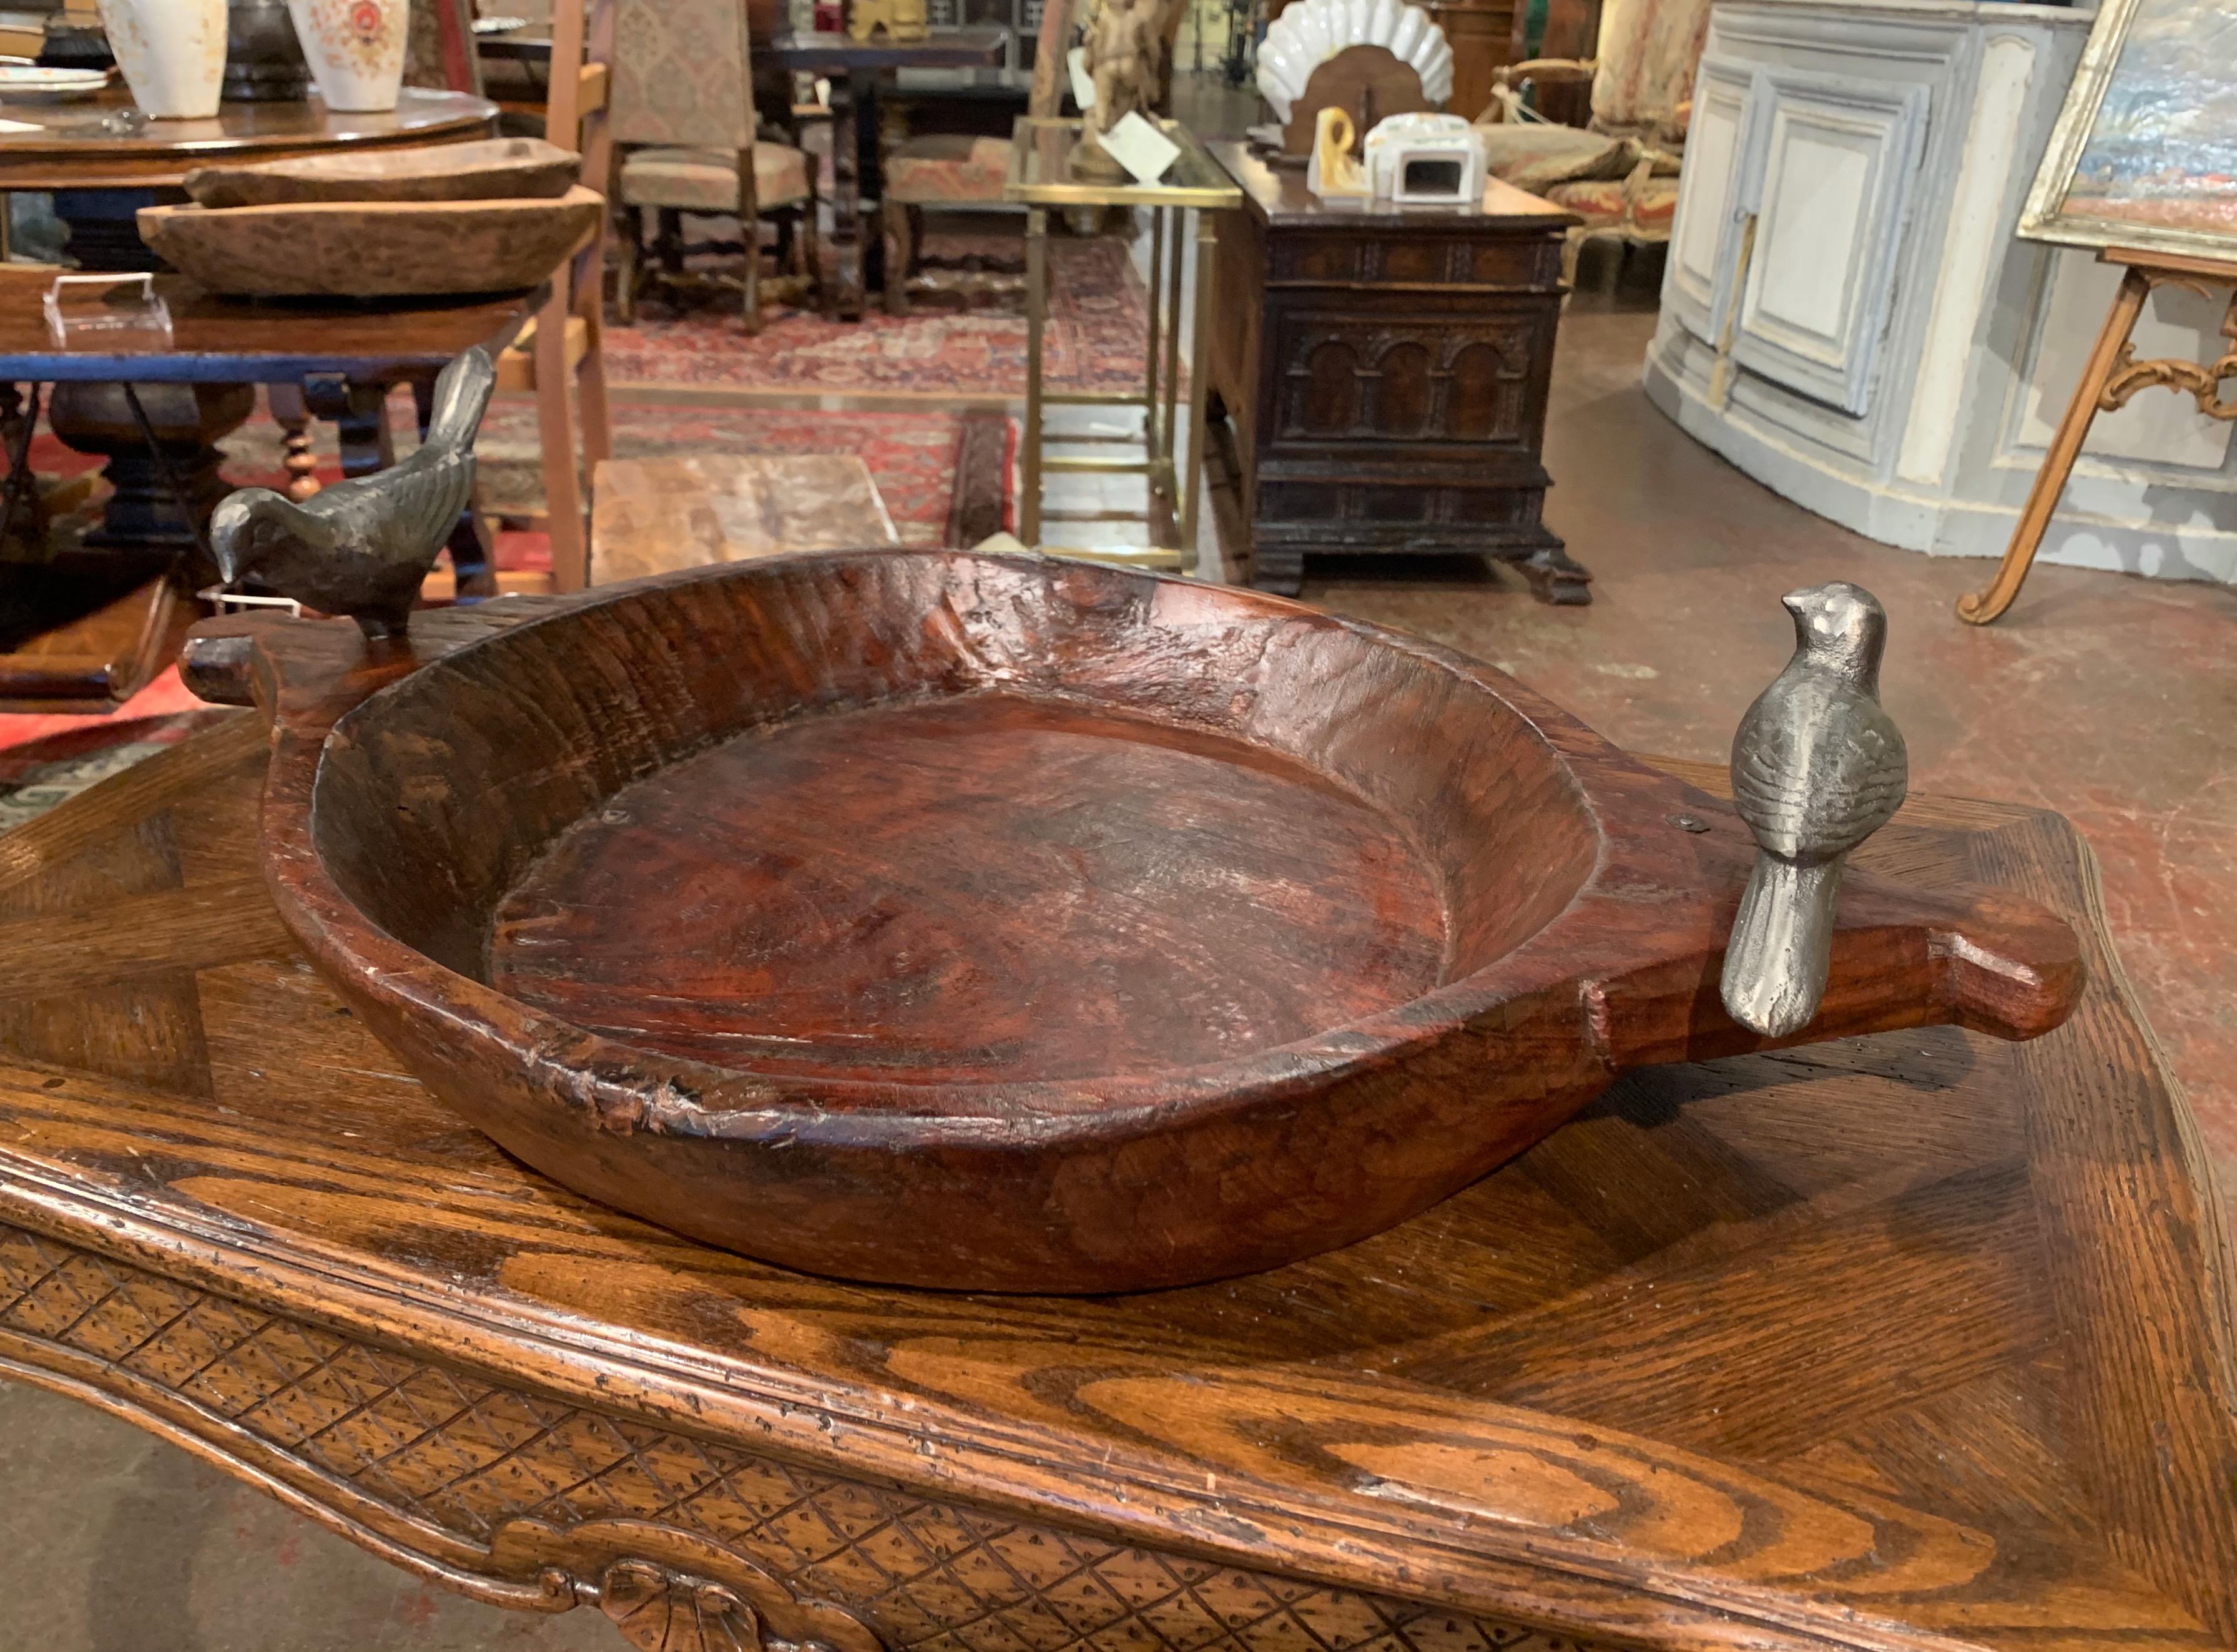 This large fruit or vegetable bowl was created circa 1990, round in shape with side handles, the chestnut dish is hand carved and is decorated with two forged and polished iron dove birds standing on top of the handles. The decorative bowl is in